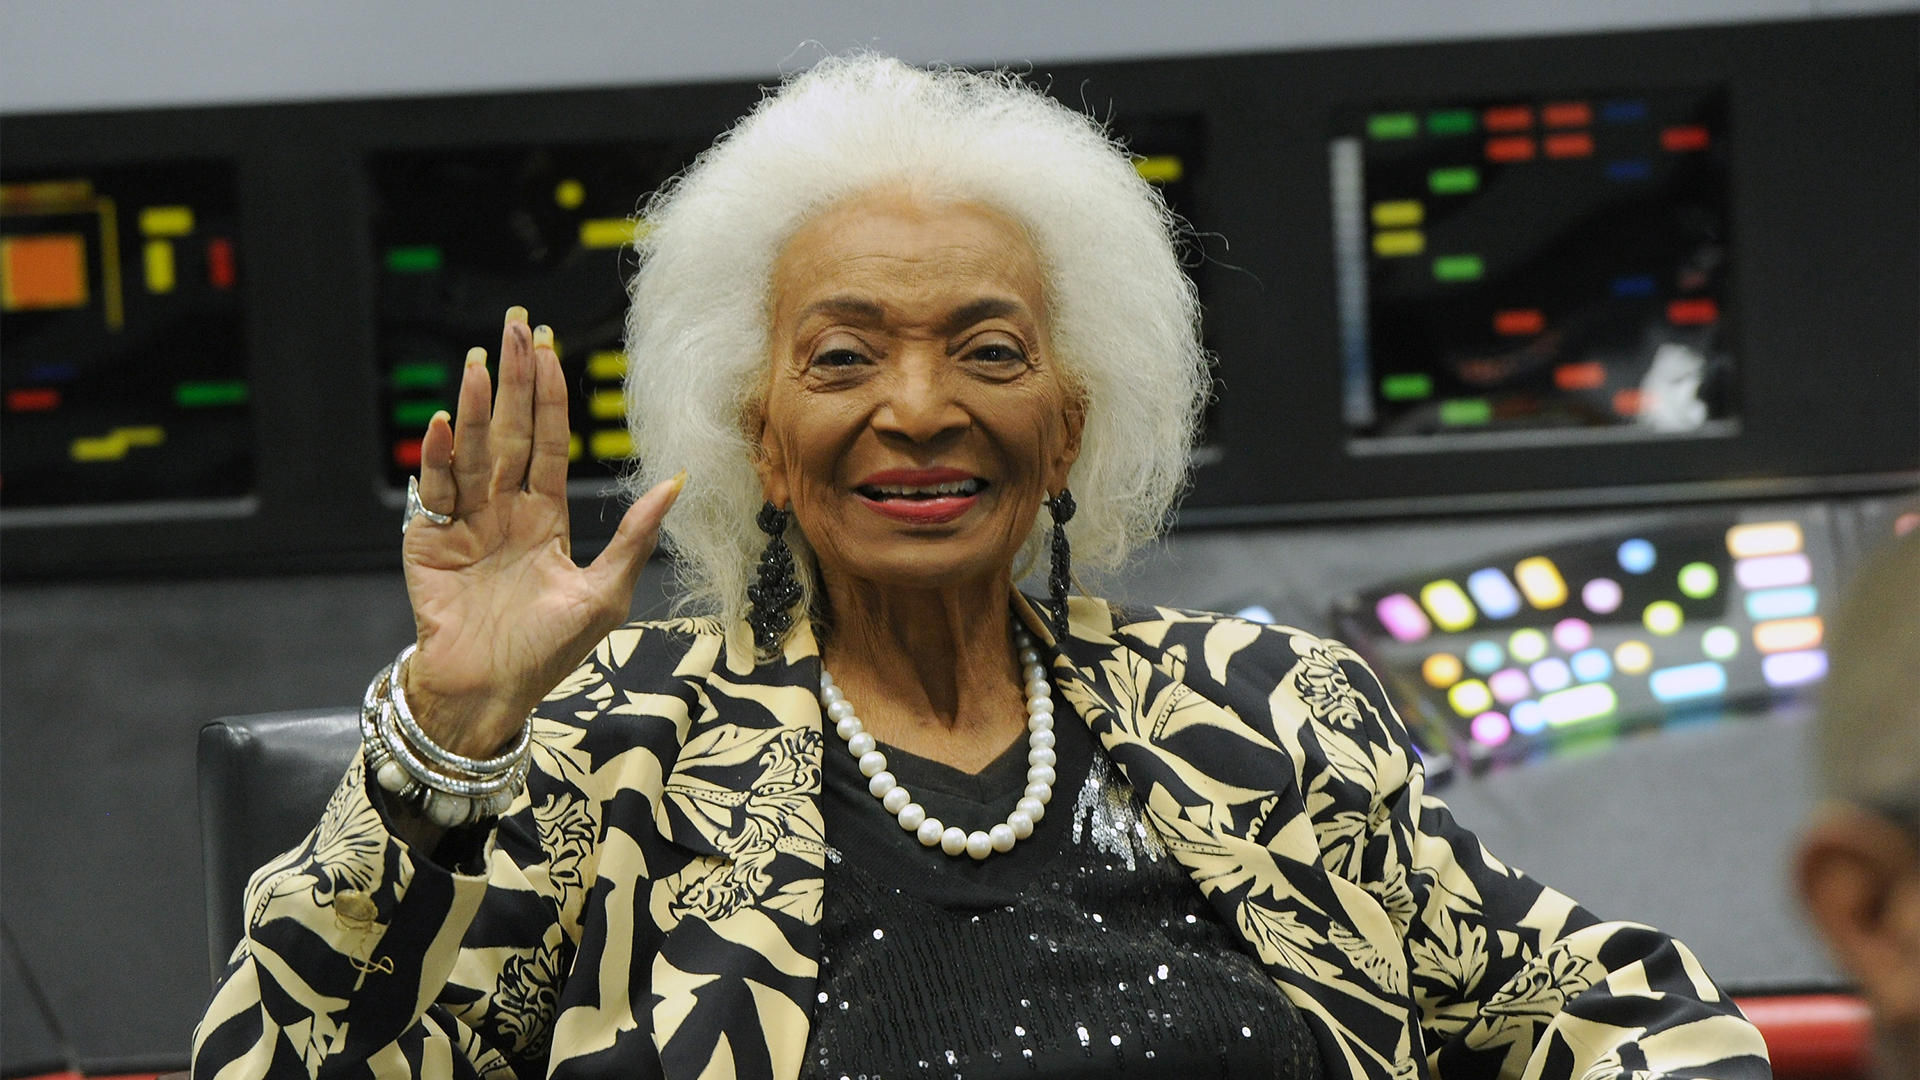 Nichelle Nichols Honored With Prestigious NASA Award For Her Contributions To STEM